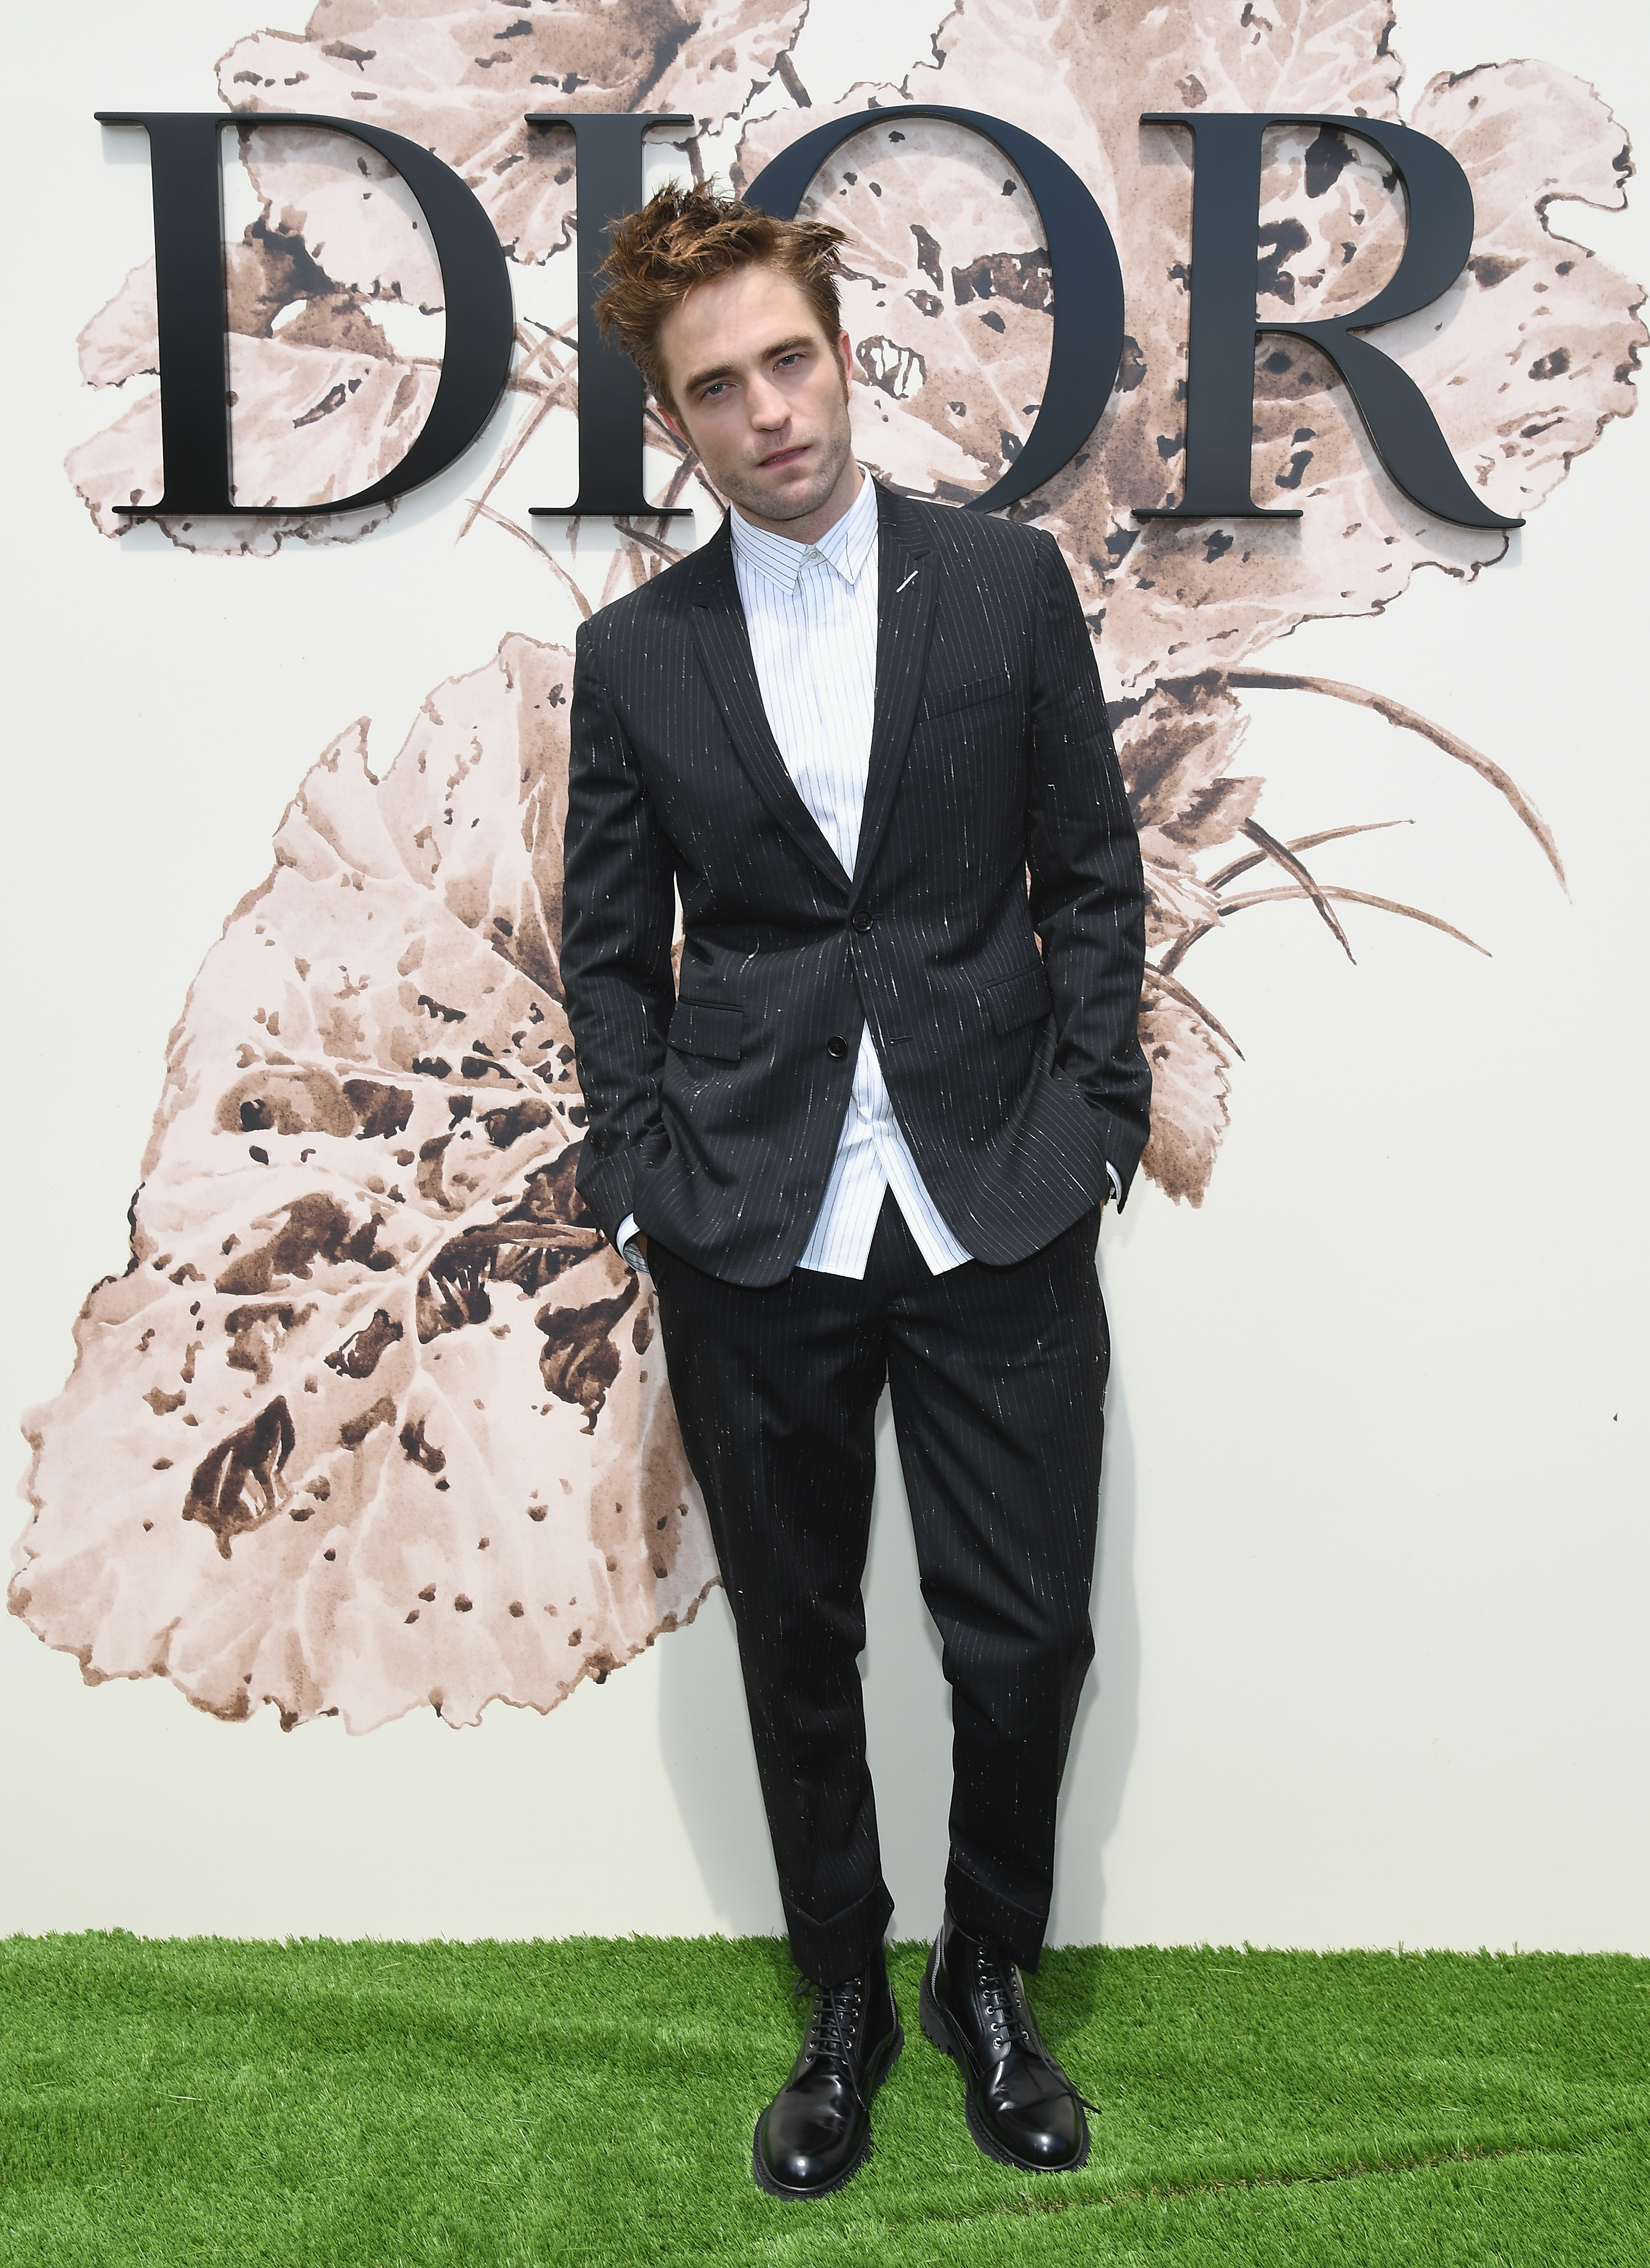 PARIS, FRANCE - JULY 03:  Robert Pattinson attends the Christian Dior Haute Couture Fall/Winter 2017-2018 show as part of Haute Couture Paris Fashion Week on July 3, 2017 in Paris, France.  (Photo by Pascal Le Segretain/Getty Images for Christian Dior) *** Local Caption *** Robert Pattinson